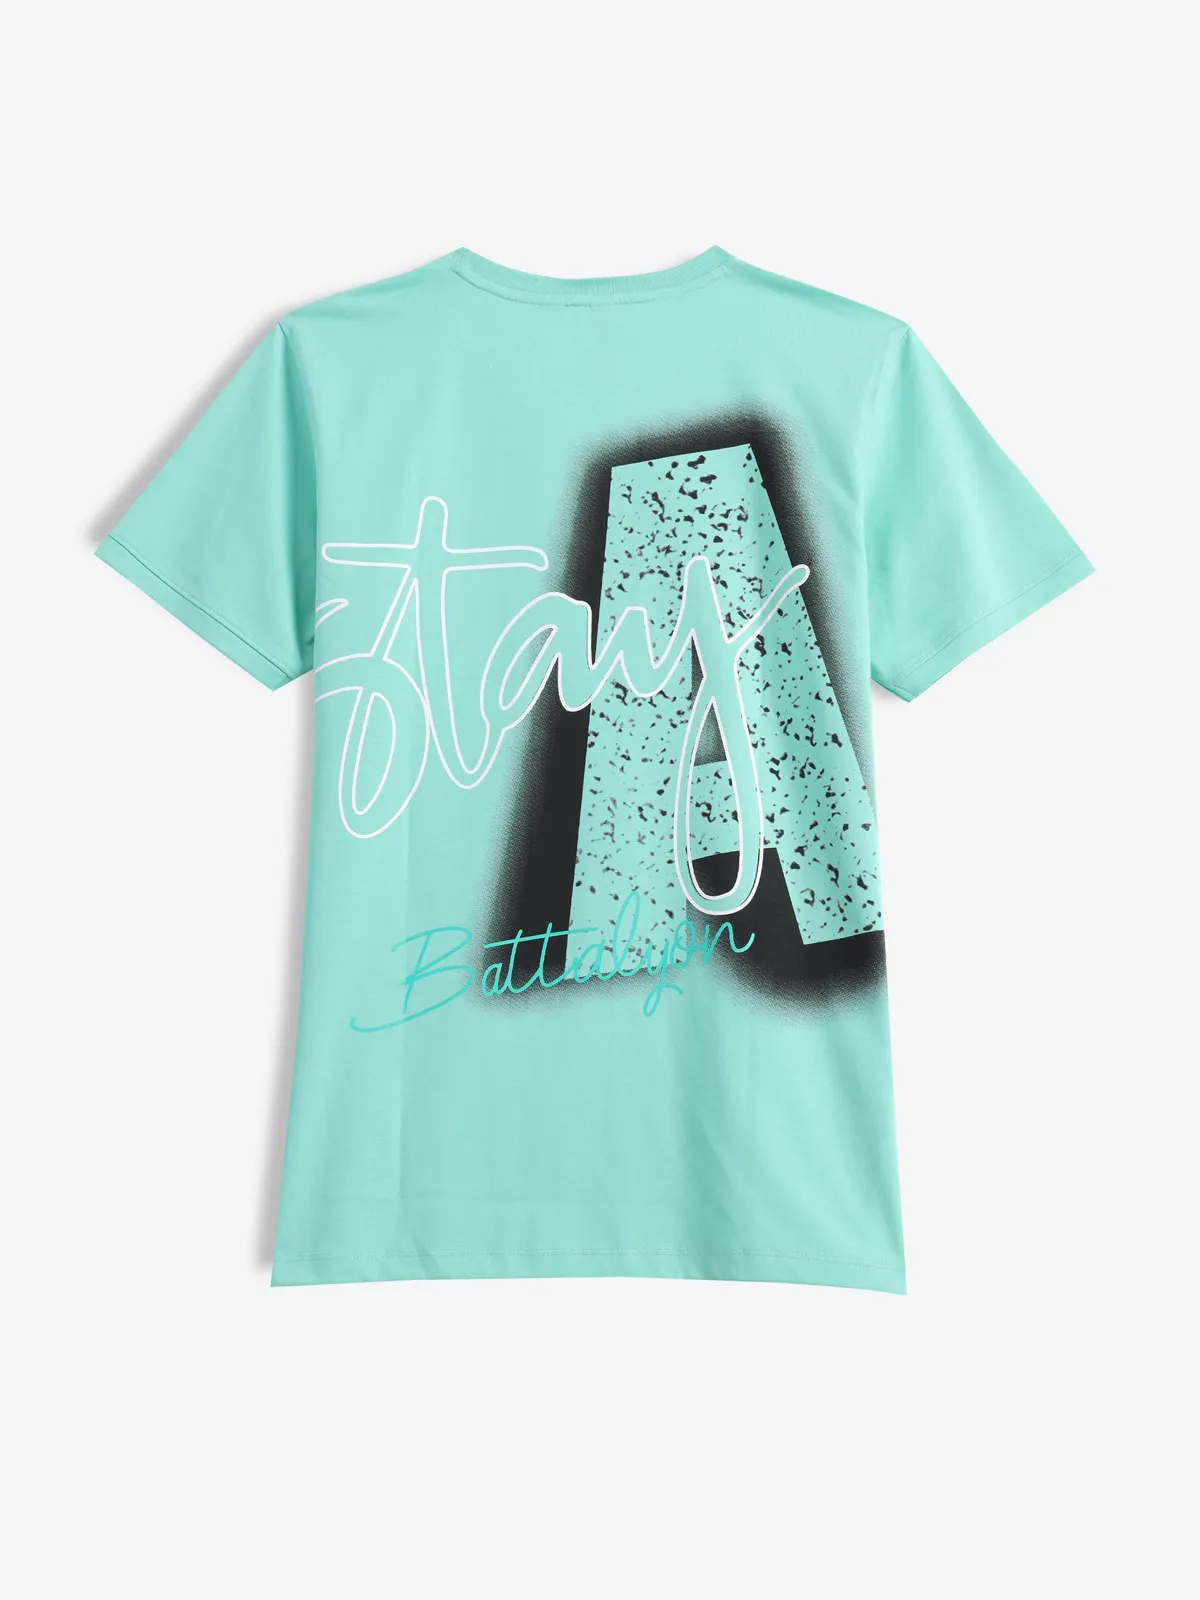 COOKYSS printed mint green t-shirt